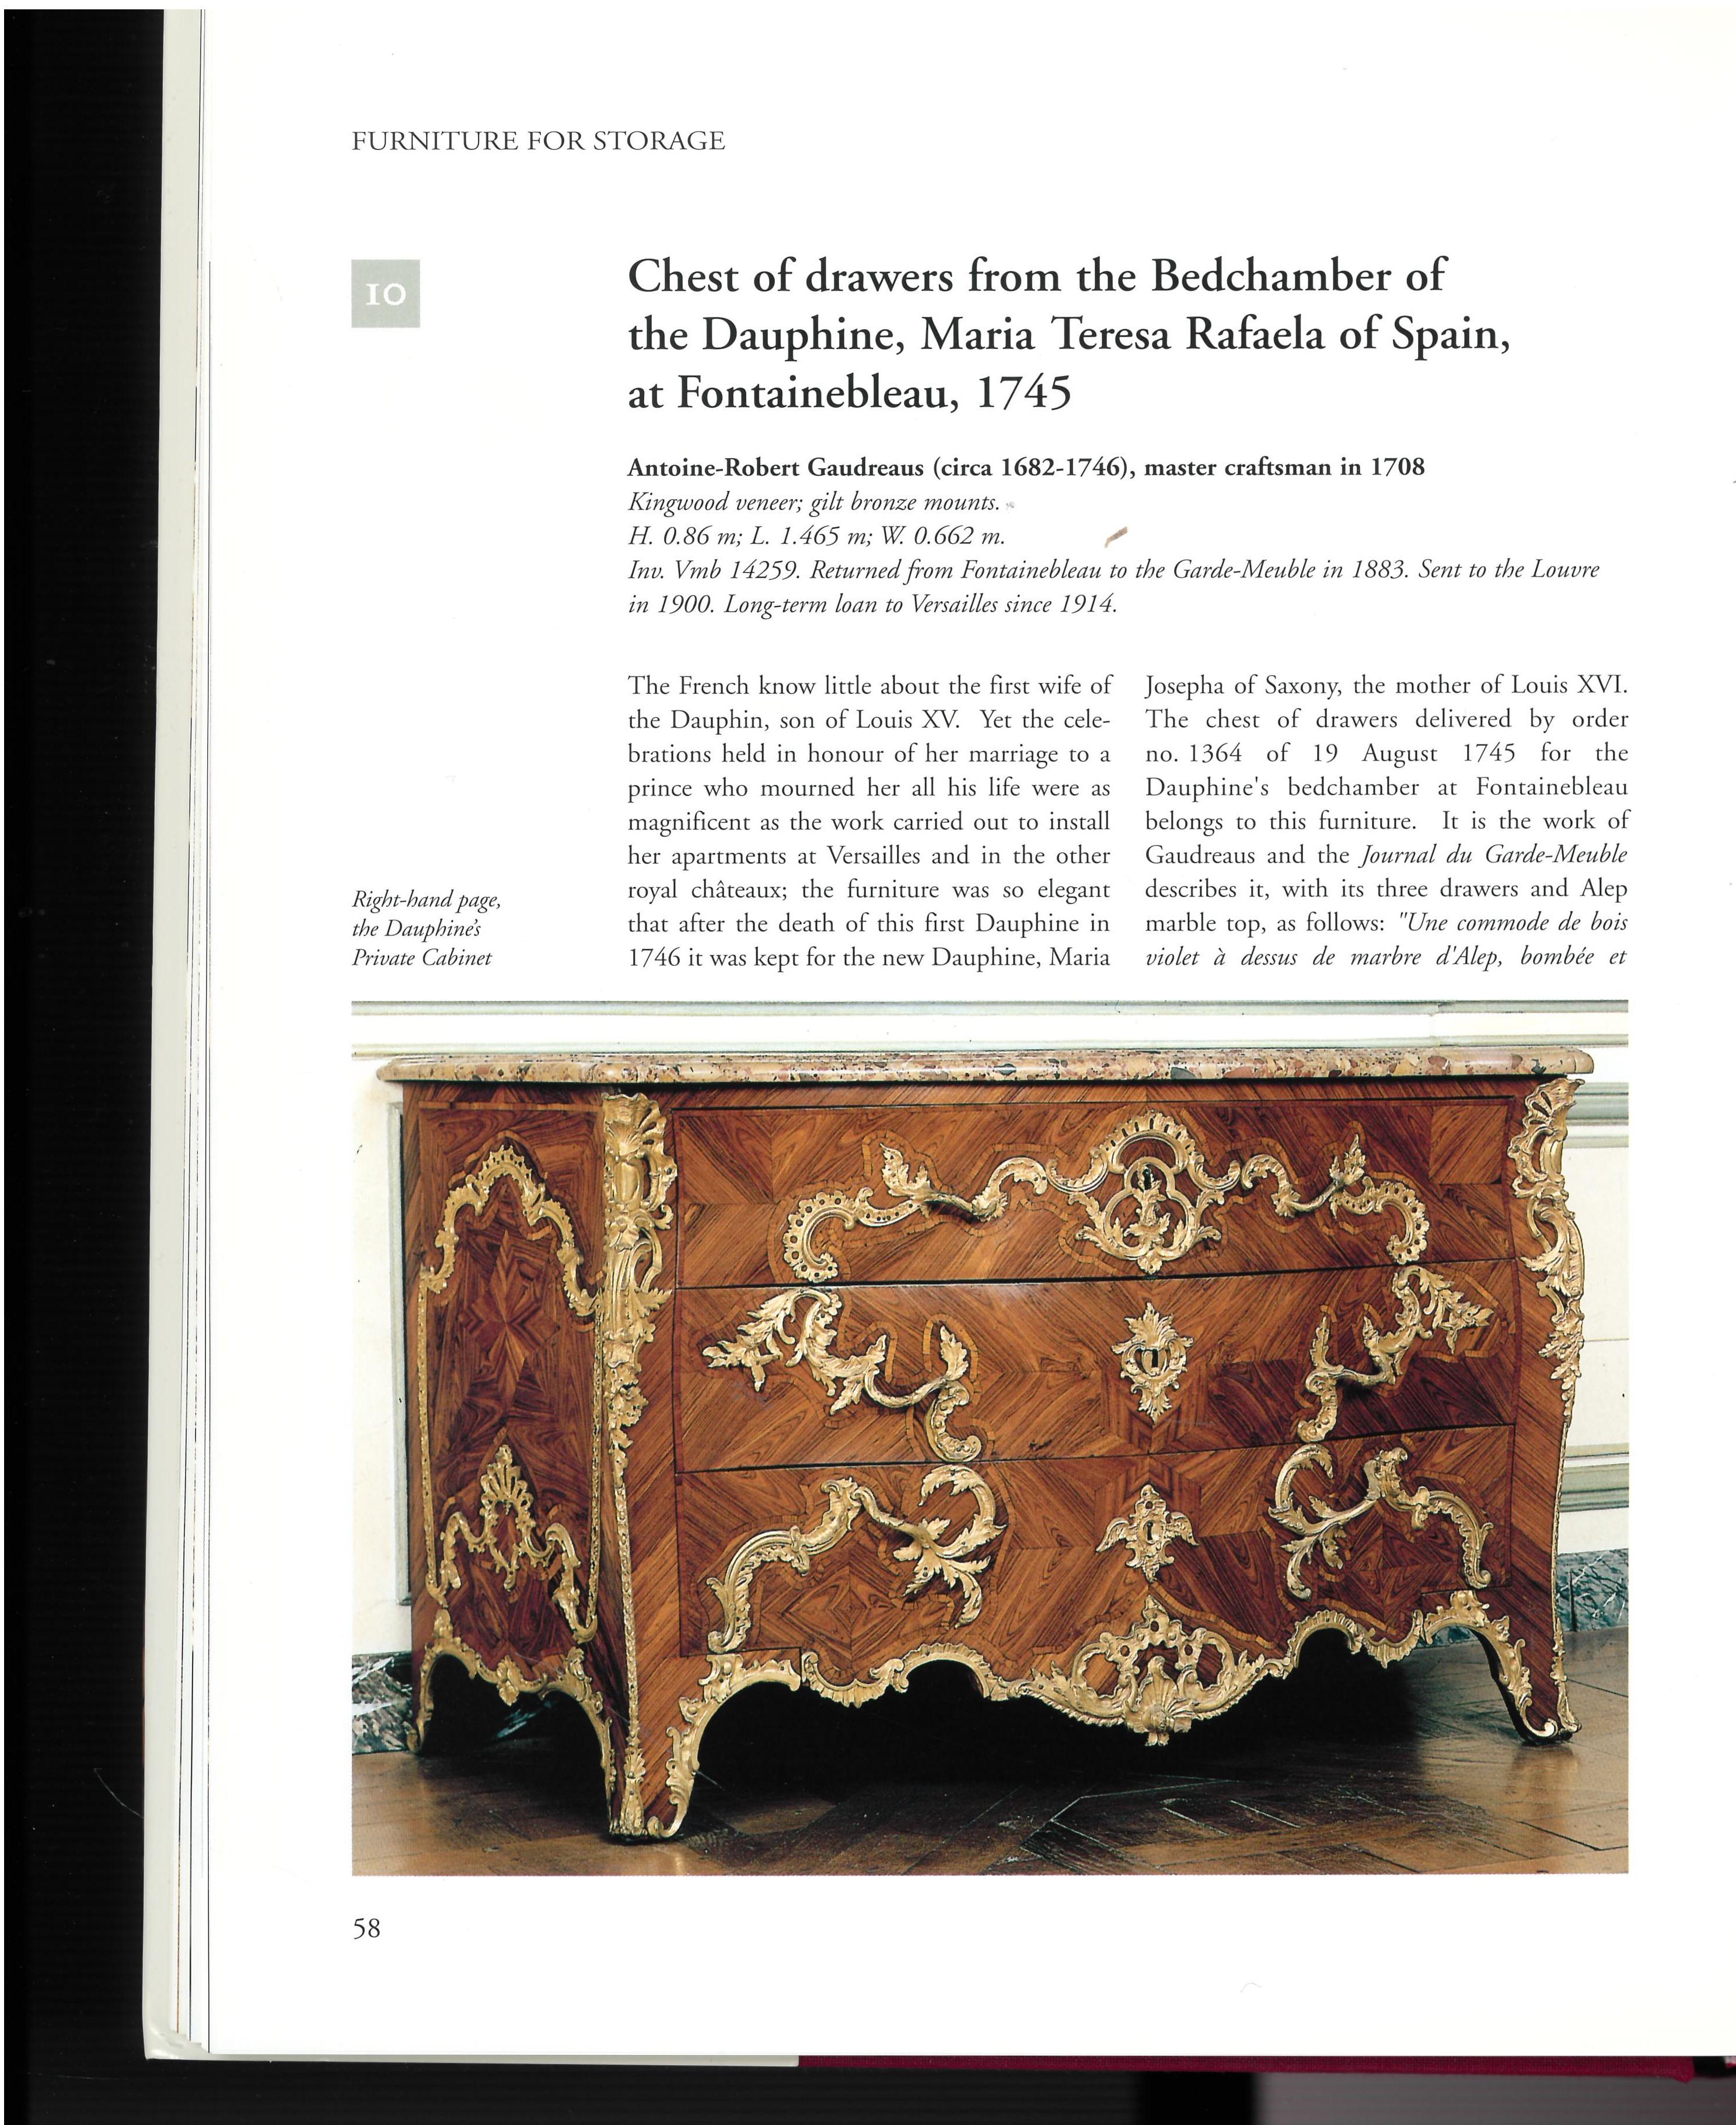 A beautifully photographed 2 volume box set of books which presents this prestigious collection of furniture in a way that cannot be seen by visitors to the palace. Versailles was the splendid palatial residences of the kings of France from the late